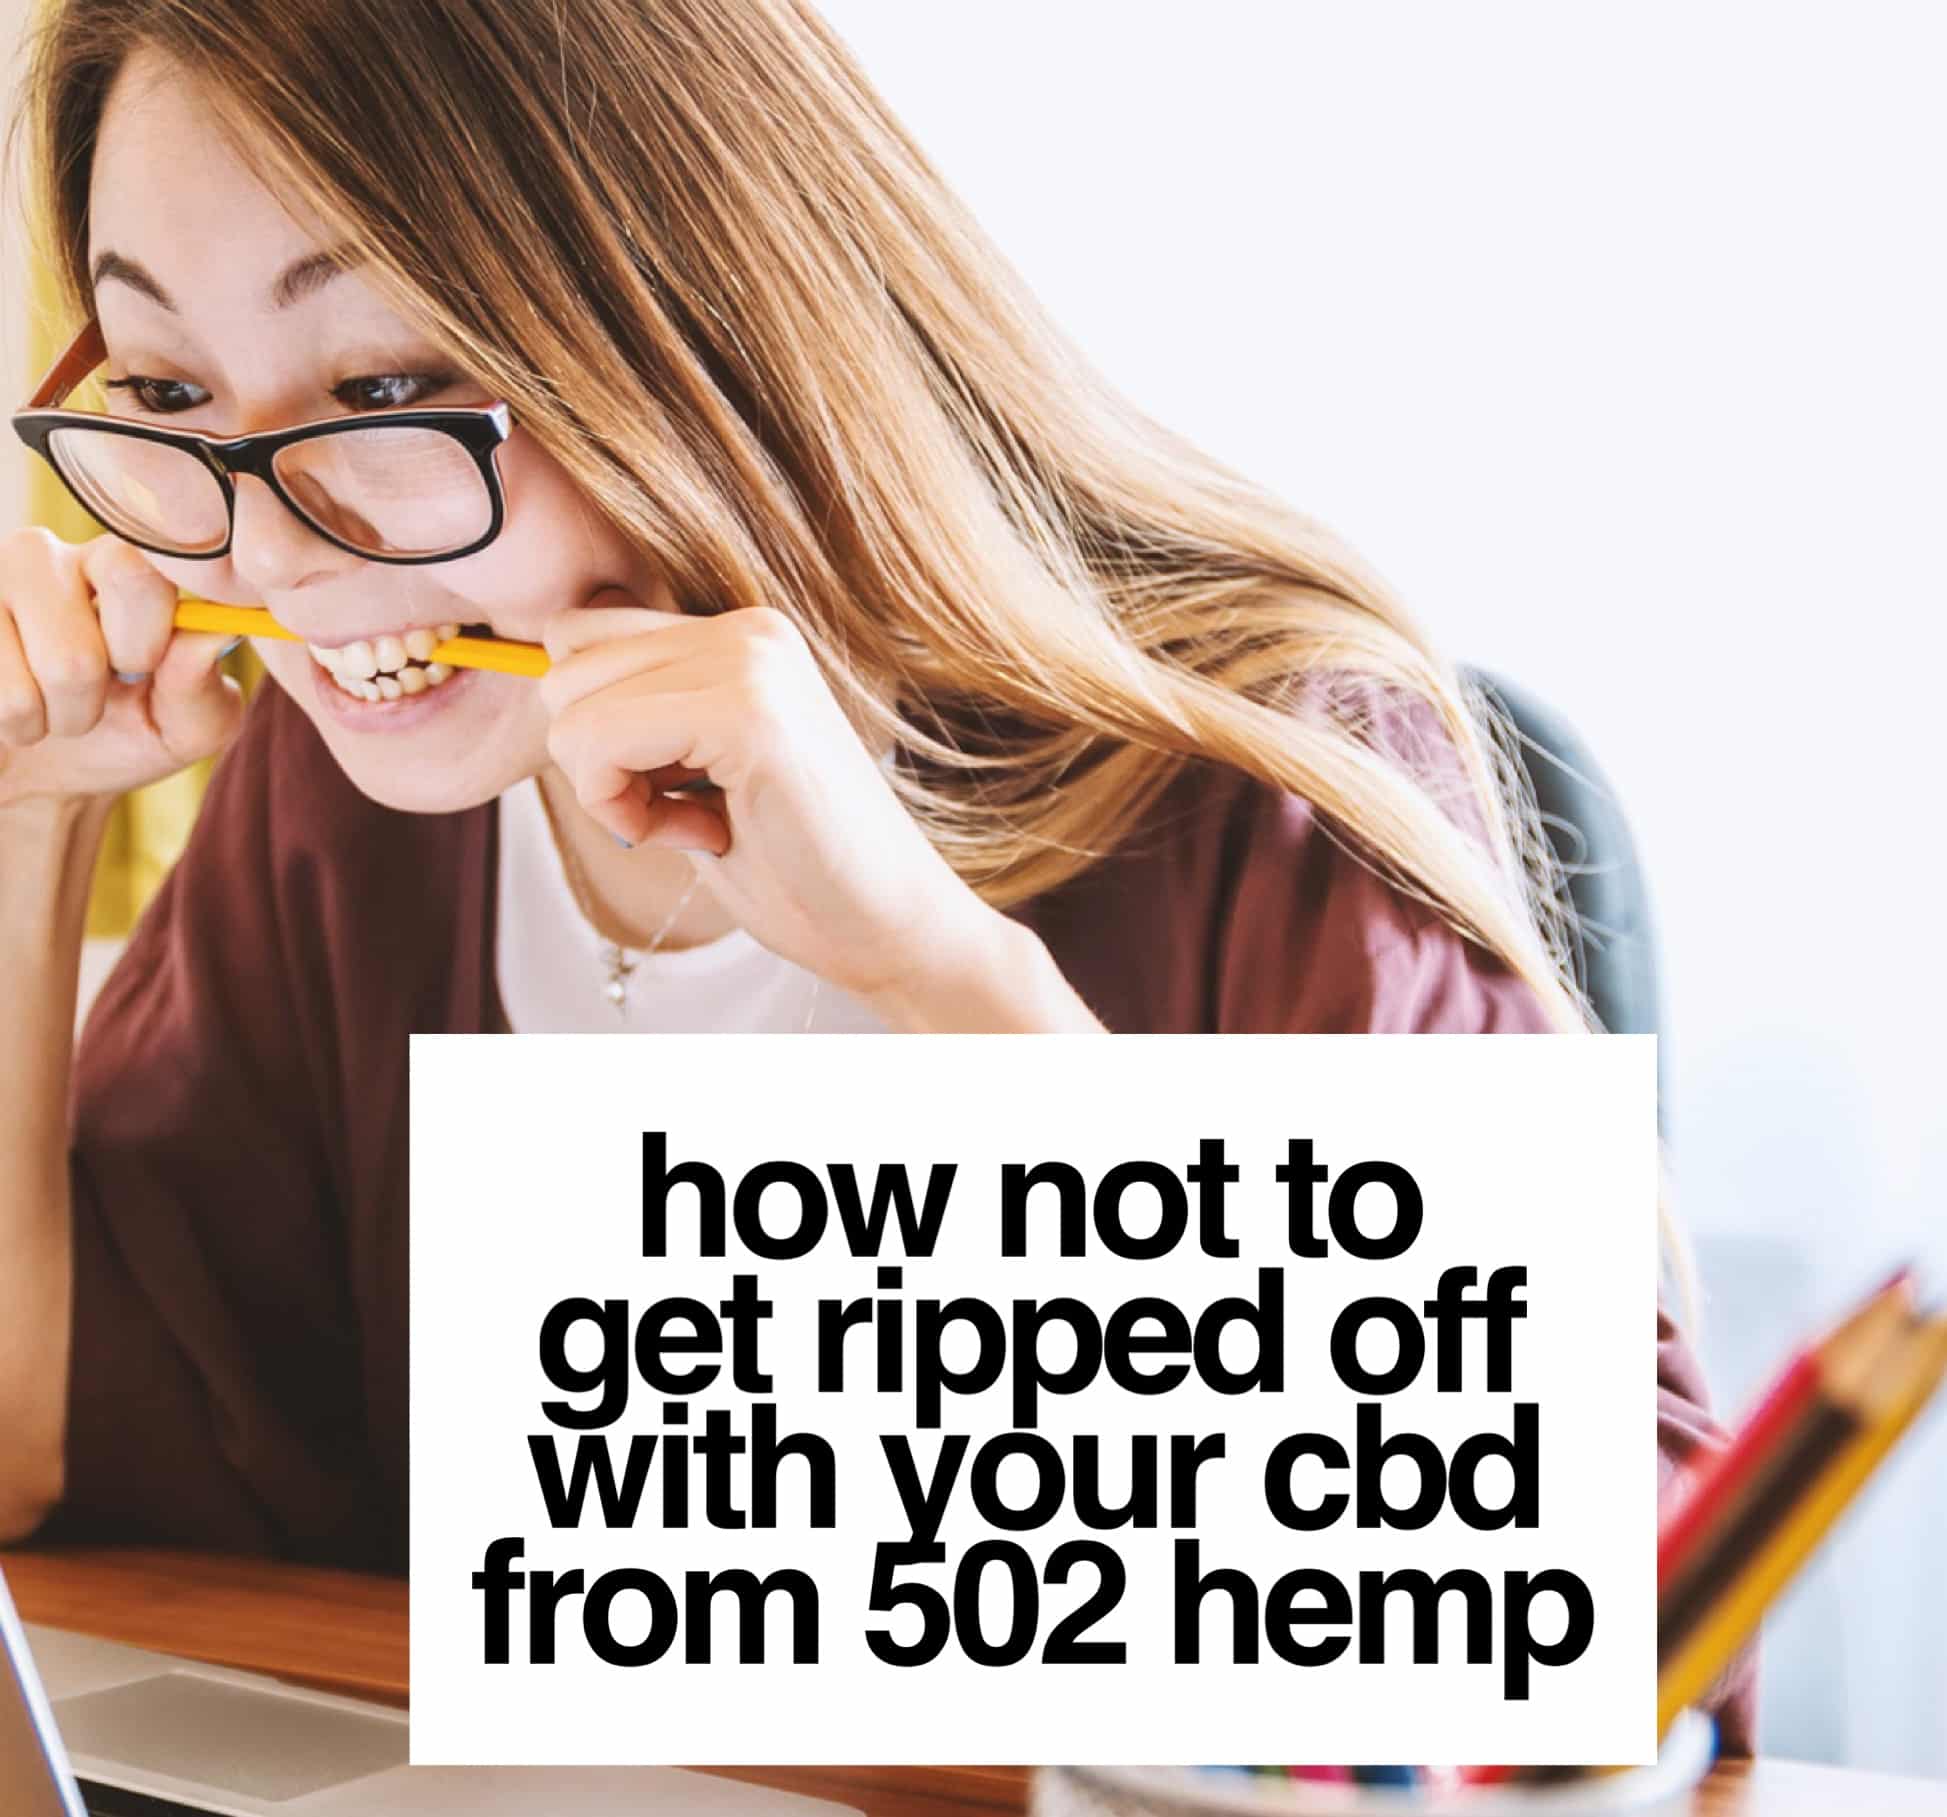 How Not to Get Ripped Off with Your CBD